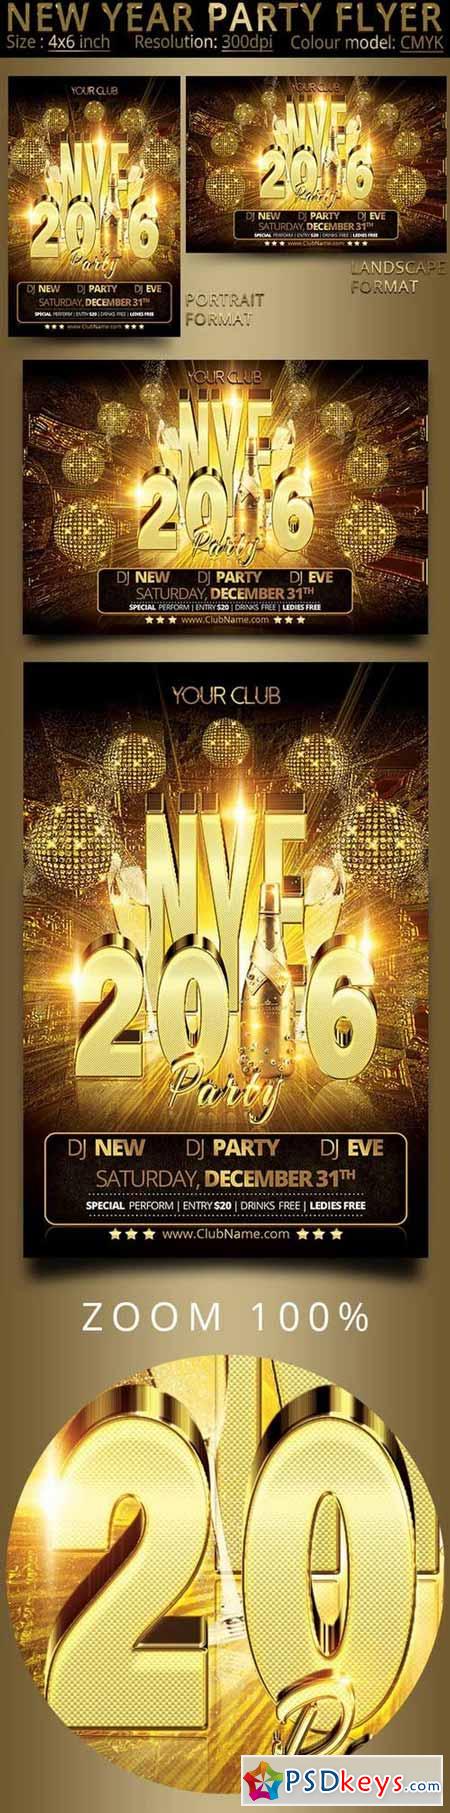 New Year Party Flyer 449602